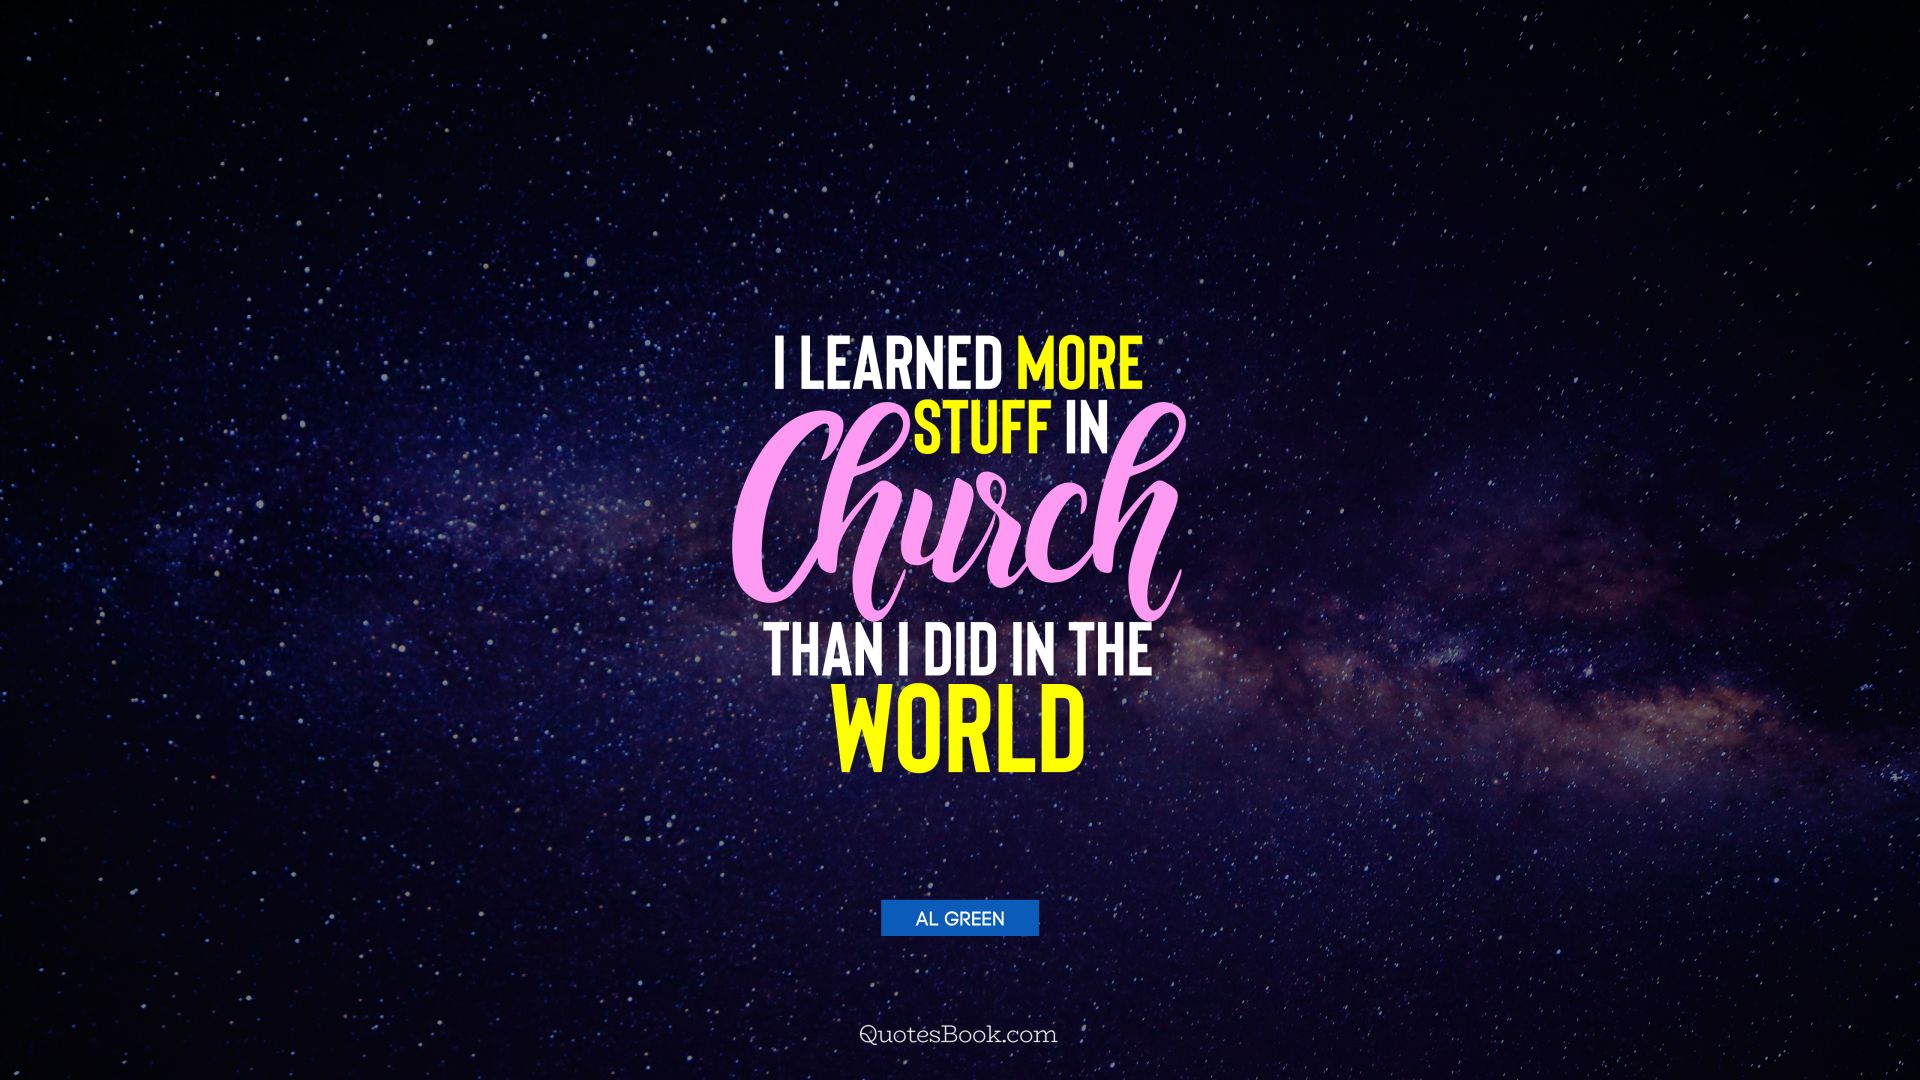 I learned more stuff in church than I did in the world. - Quote by Al Green